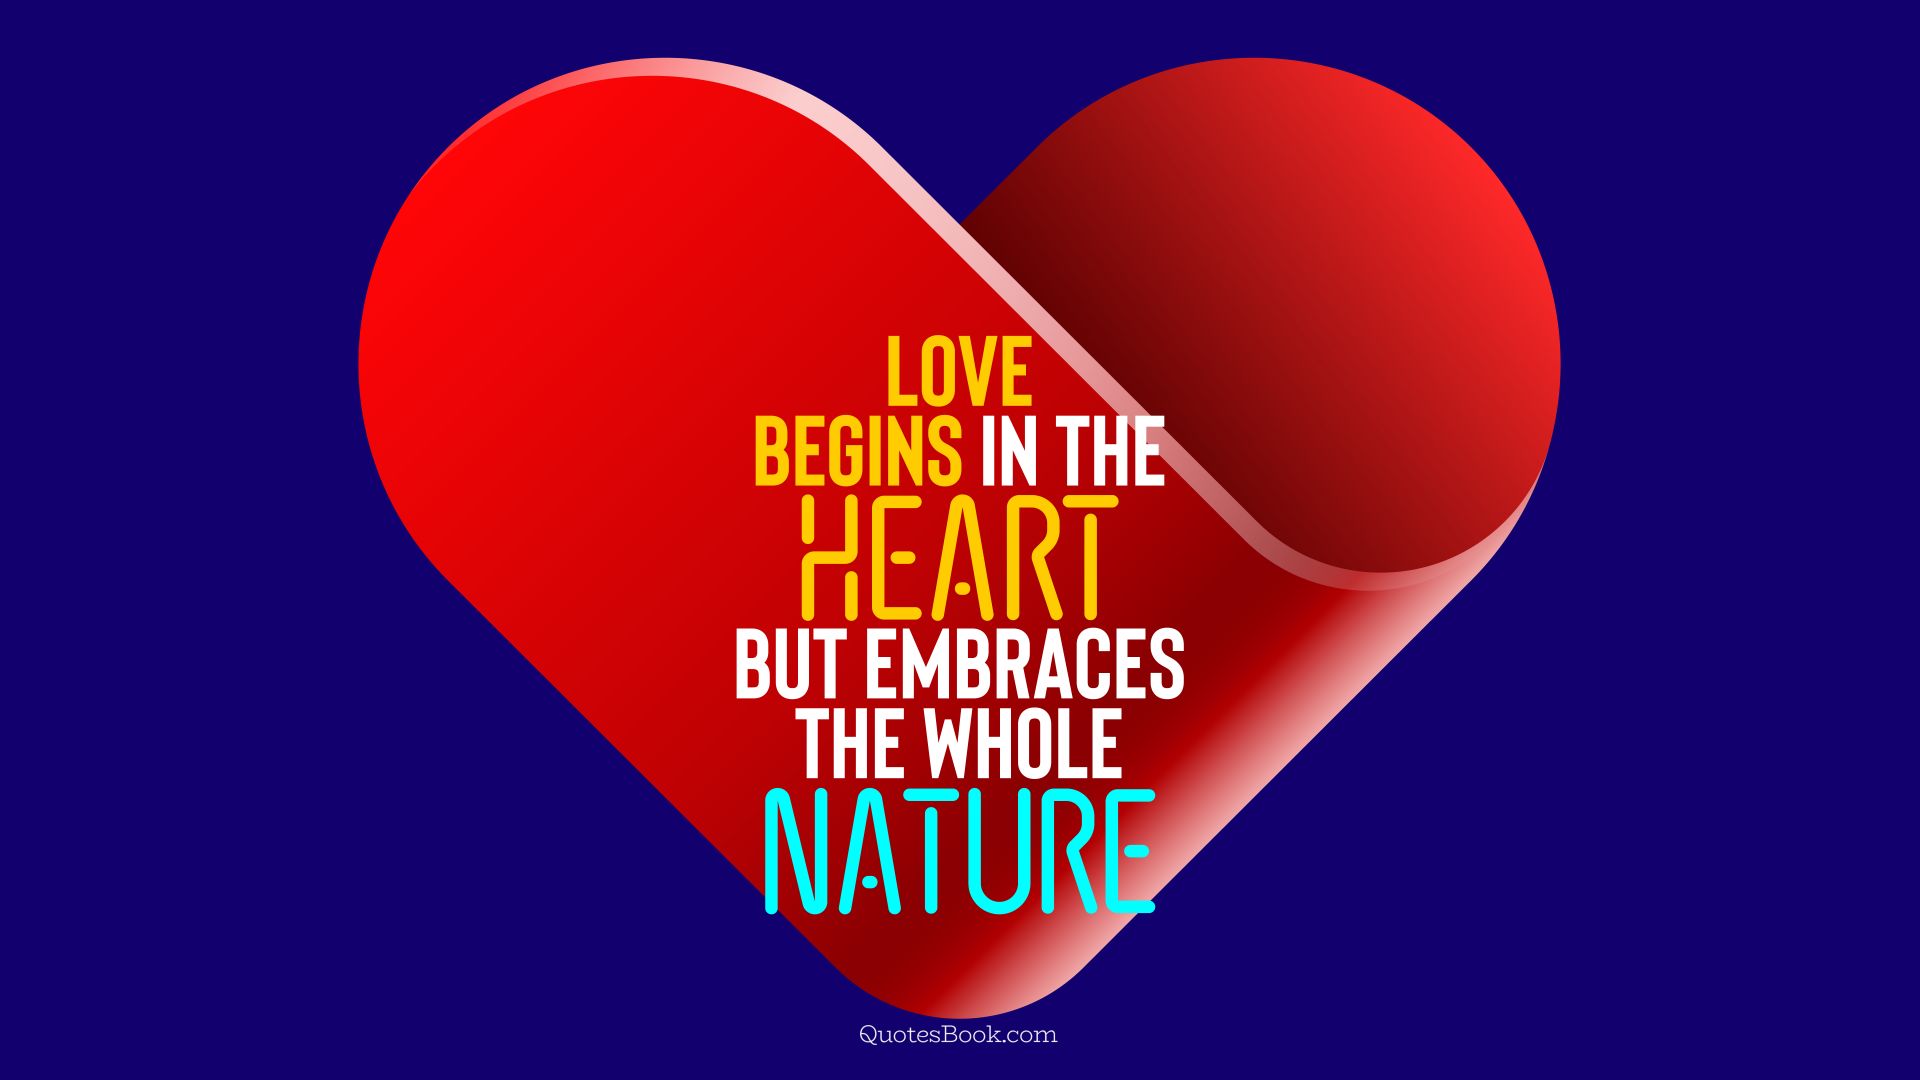 Love begins in the heart but embraces the whole nature